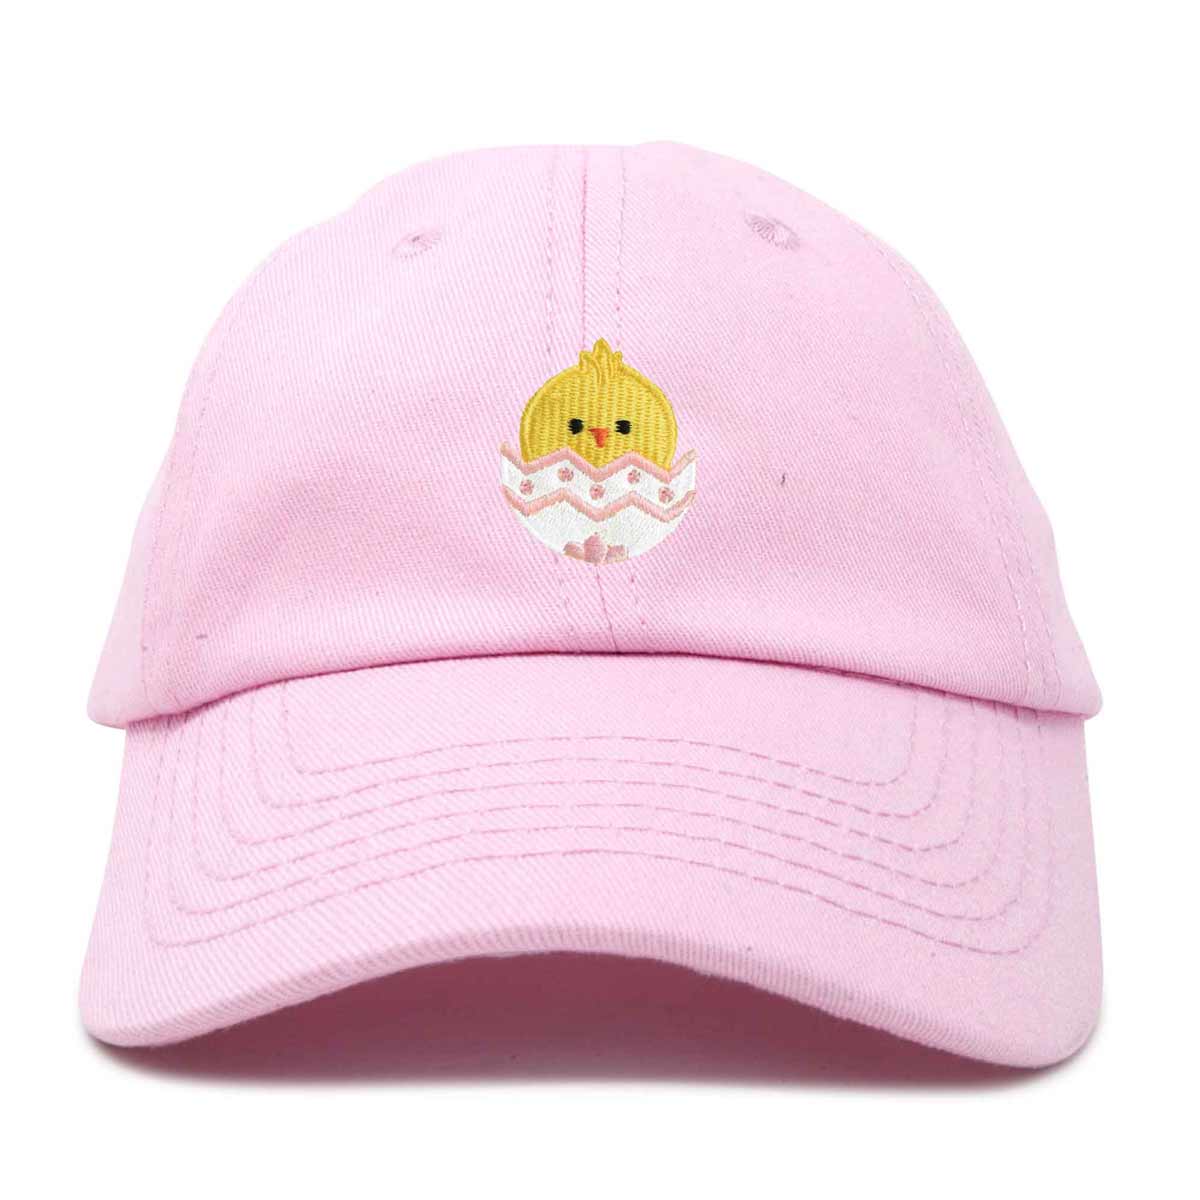 Dalix Easter Chick Hat